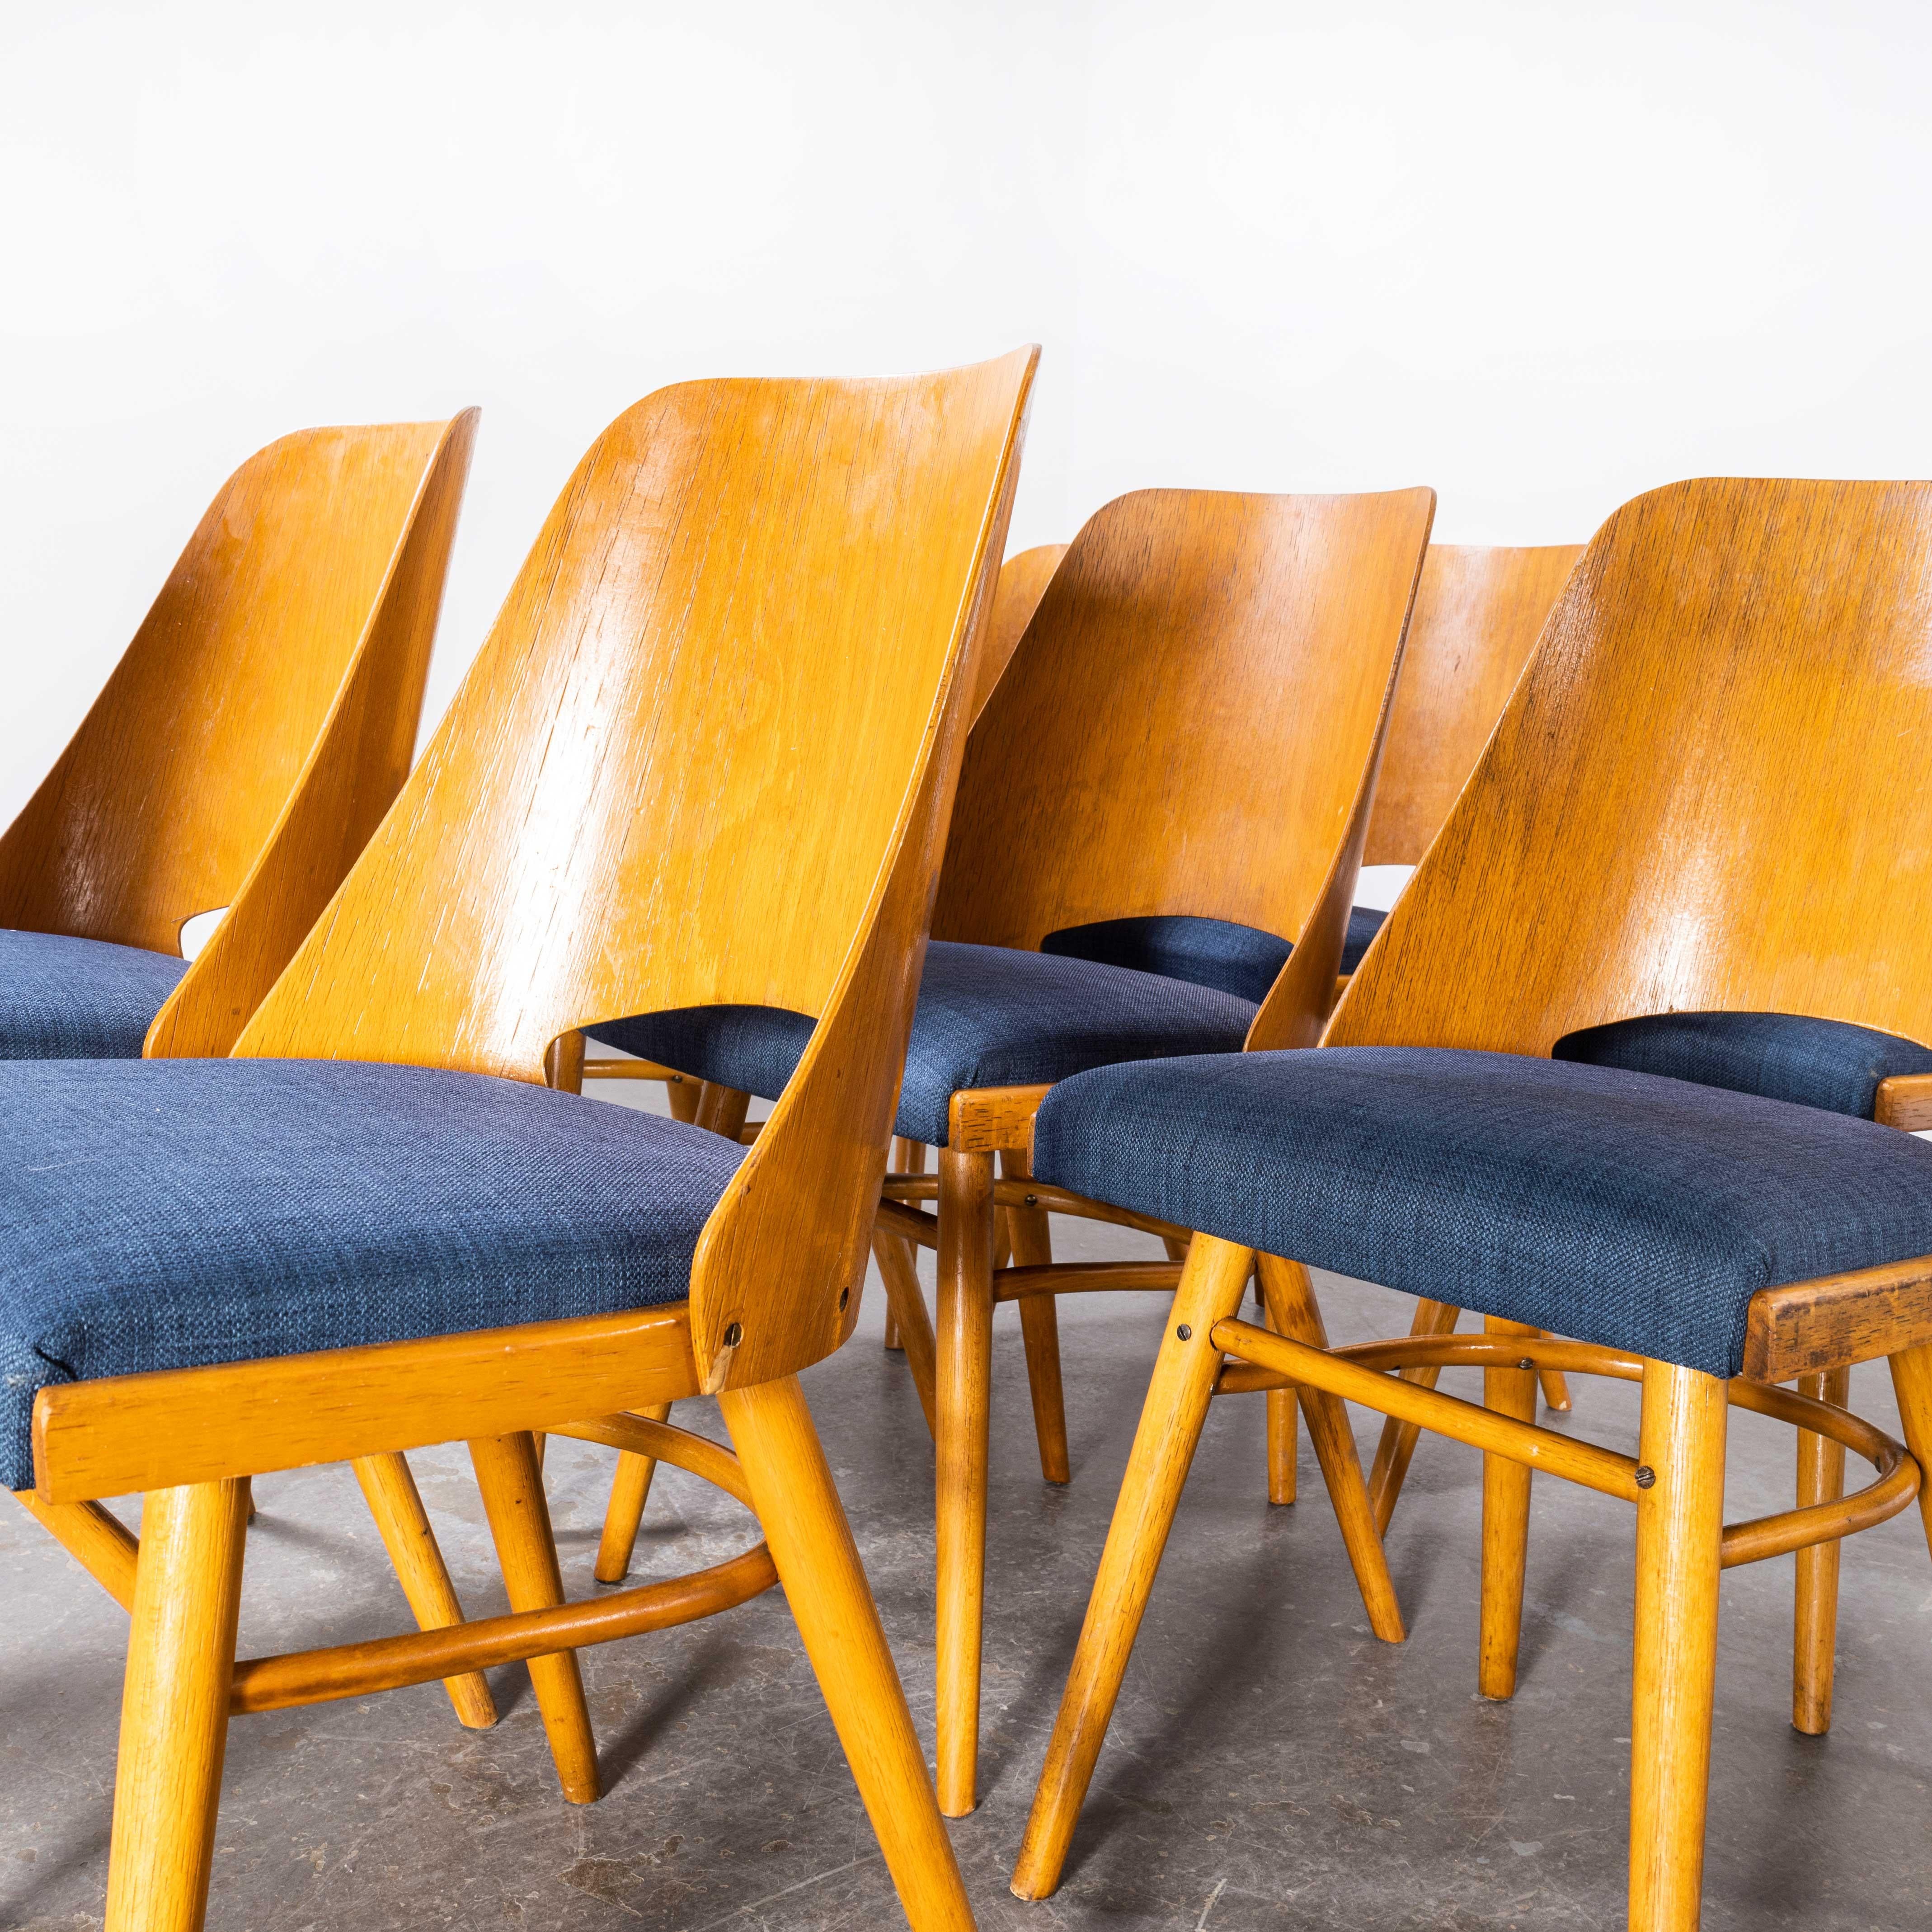 Mid-20th Century 1950's Re -Upholstered Thon Light Oak Chairs By Radomir Hoffman - Set Of Ten For Sale